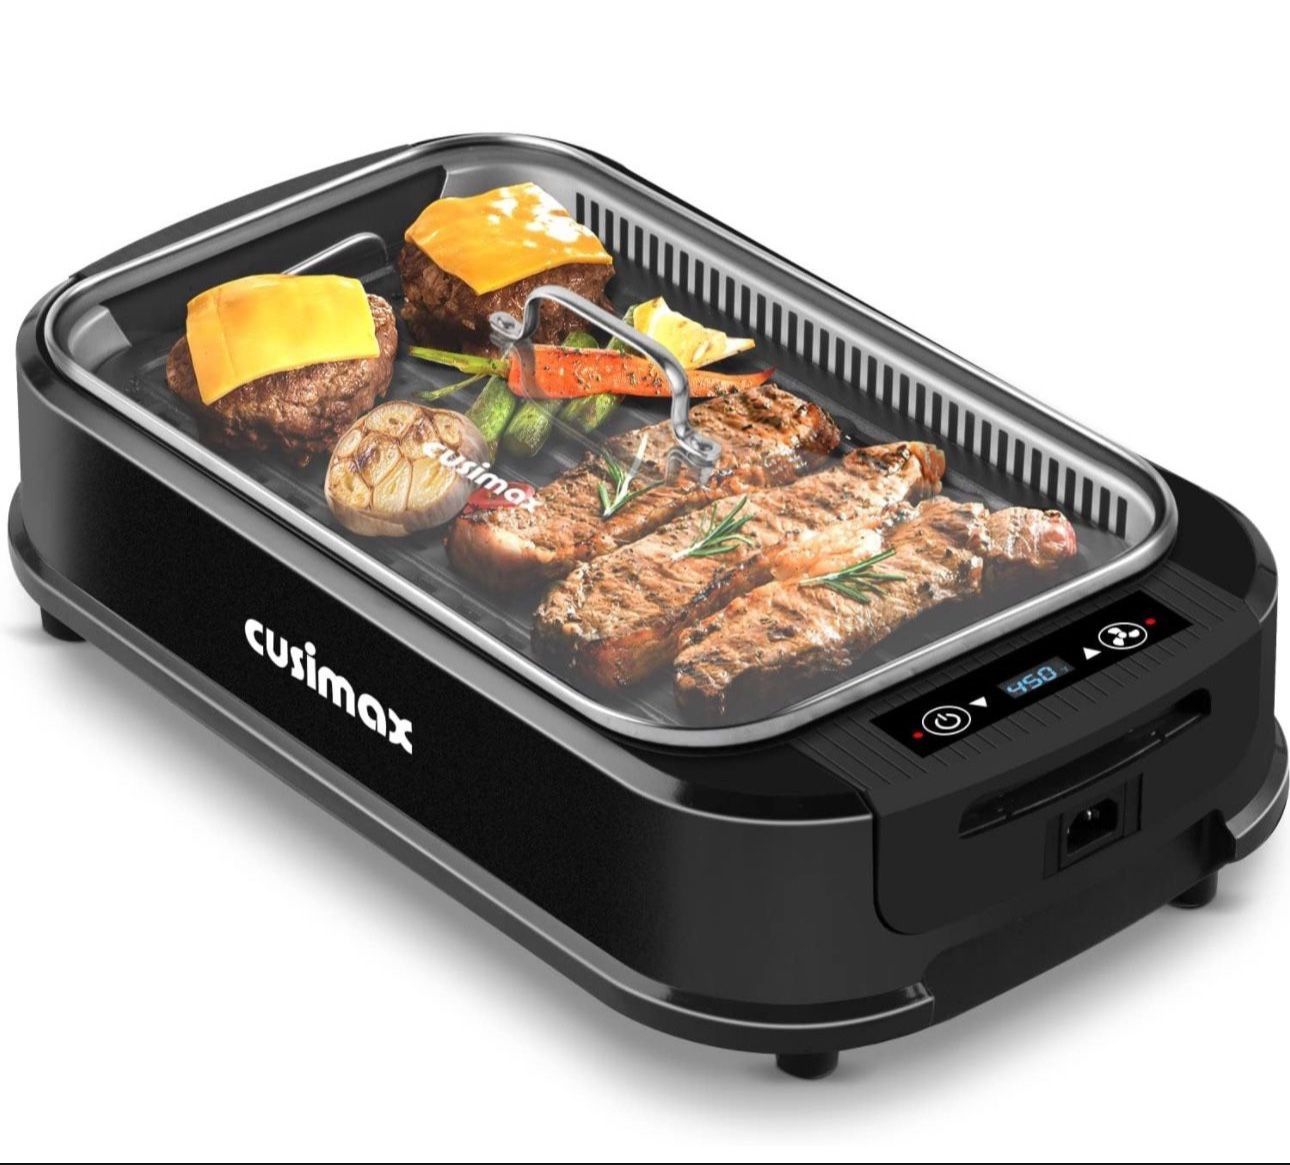 Smokeless Grill Indoor, CUSIMAX Electric Grill, 1500W Grill Portable Korean BBQ Grill with LED Smart Display & Tempered Glass Lid, Non-stick Removable